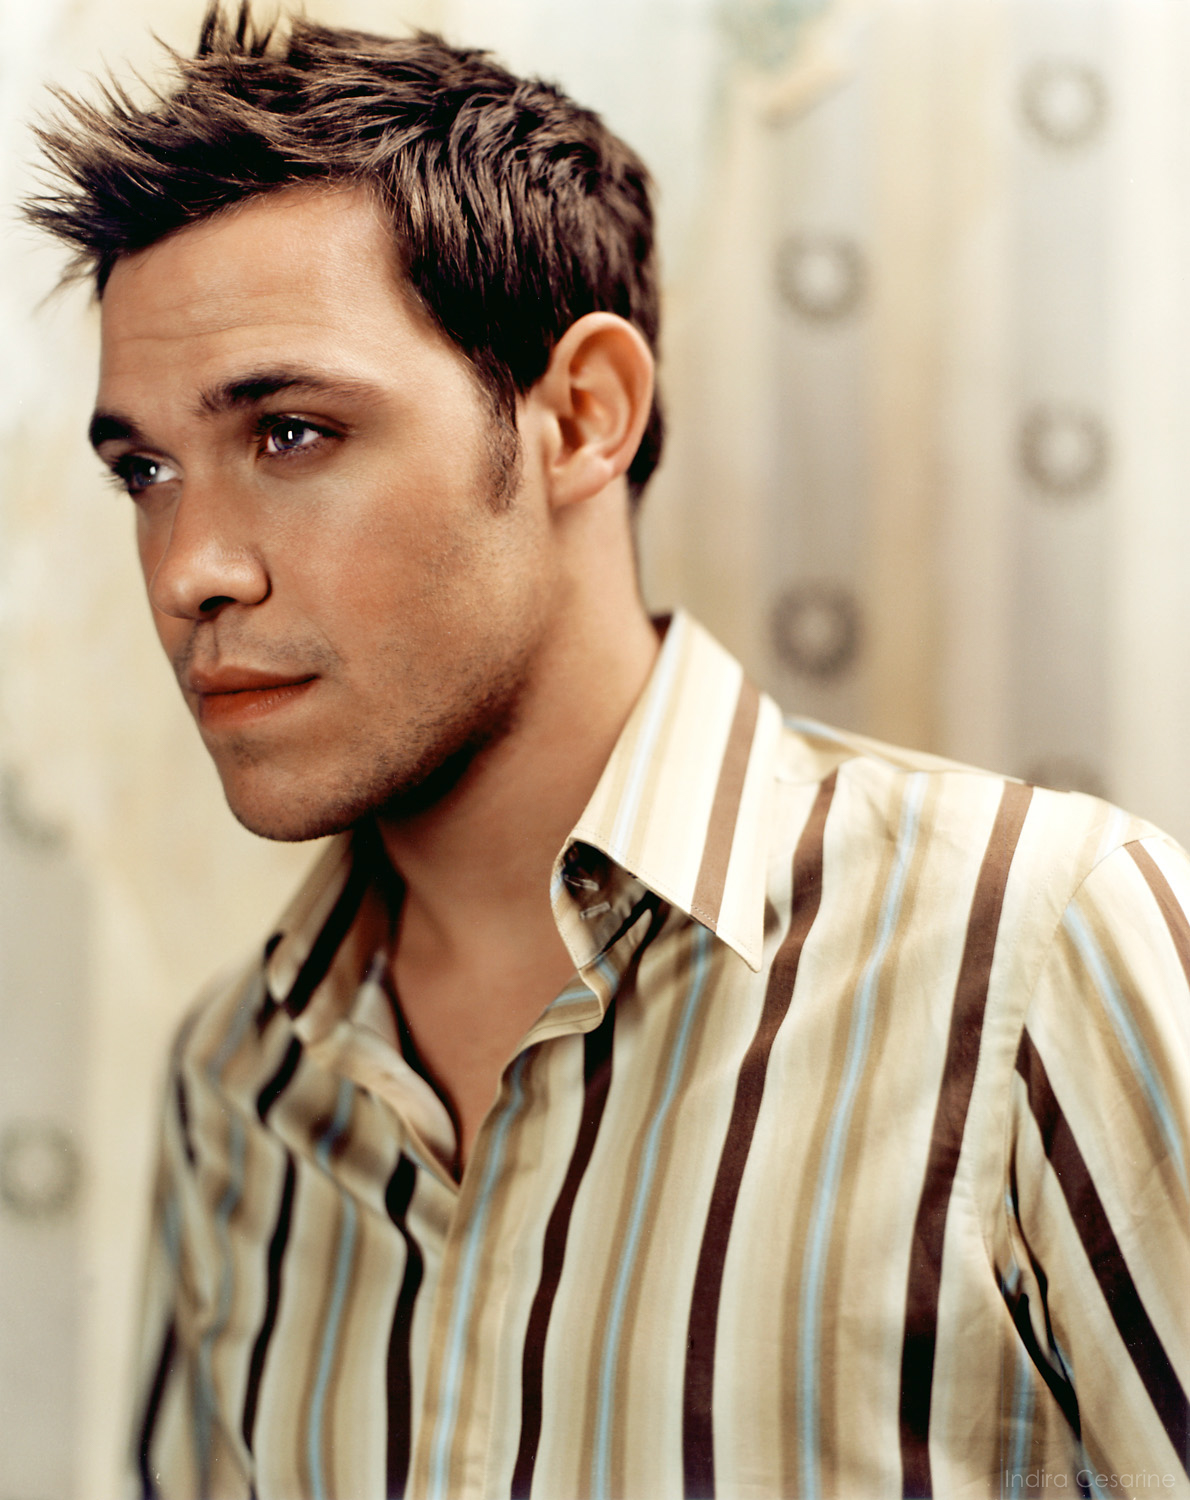 Will-Young-Photography-by-Indira-Cesarine-014.jpg